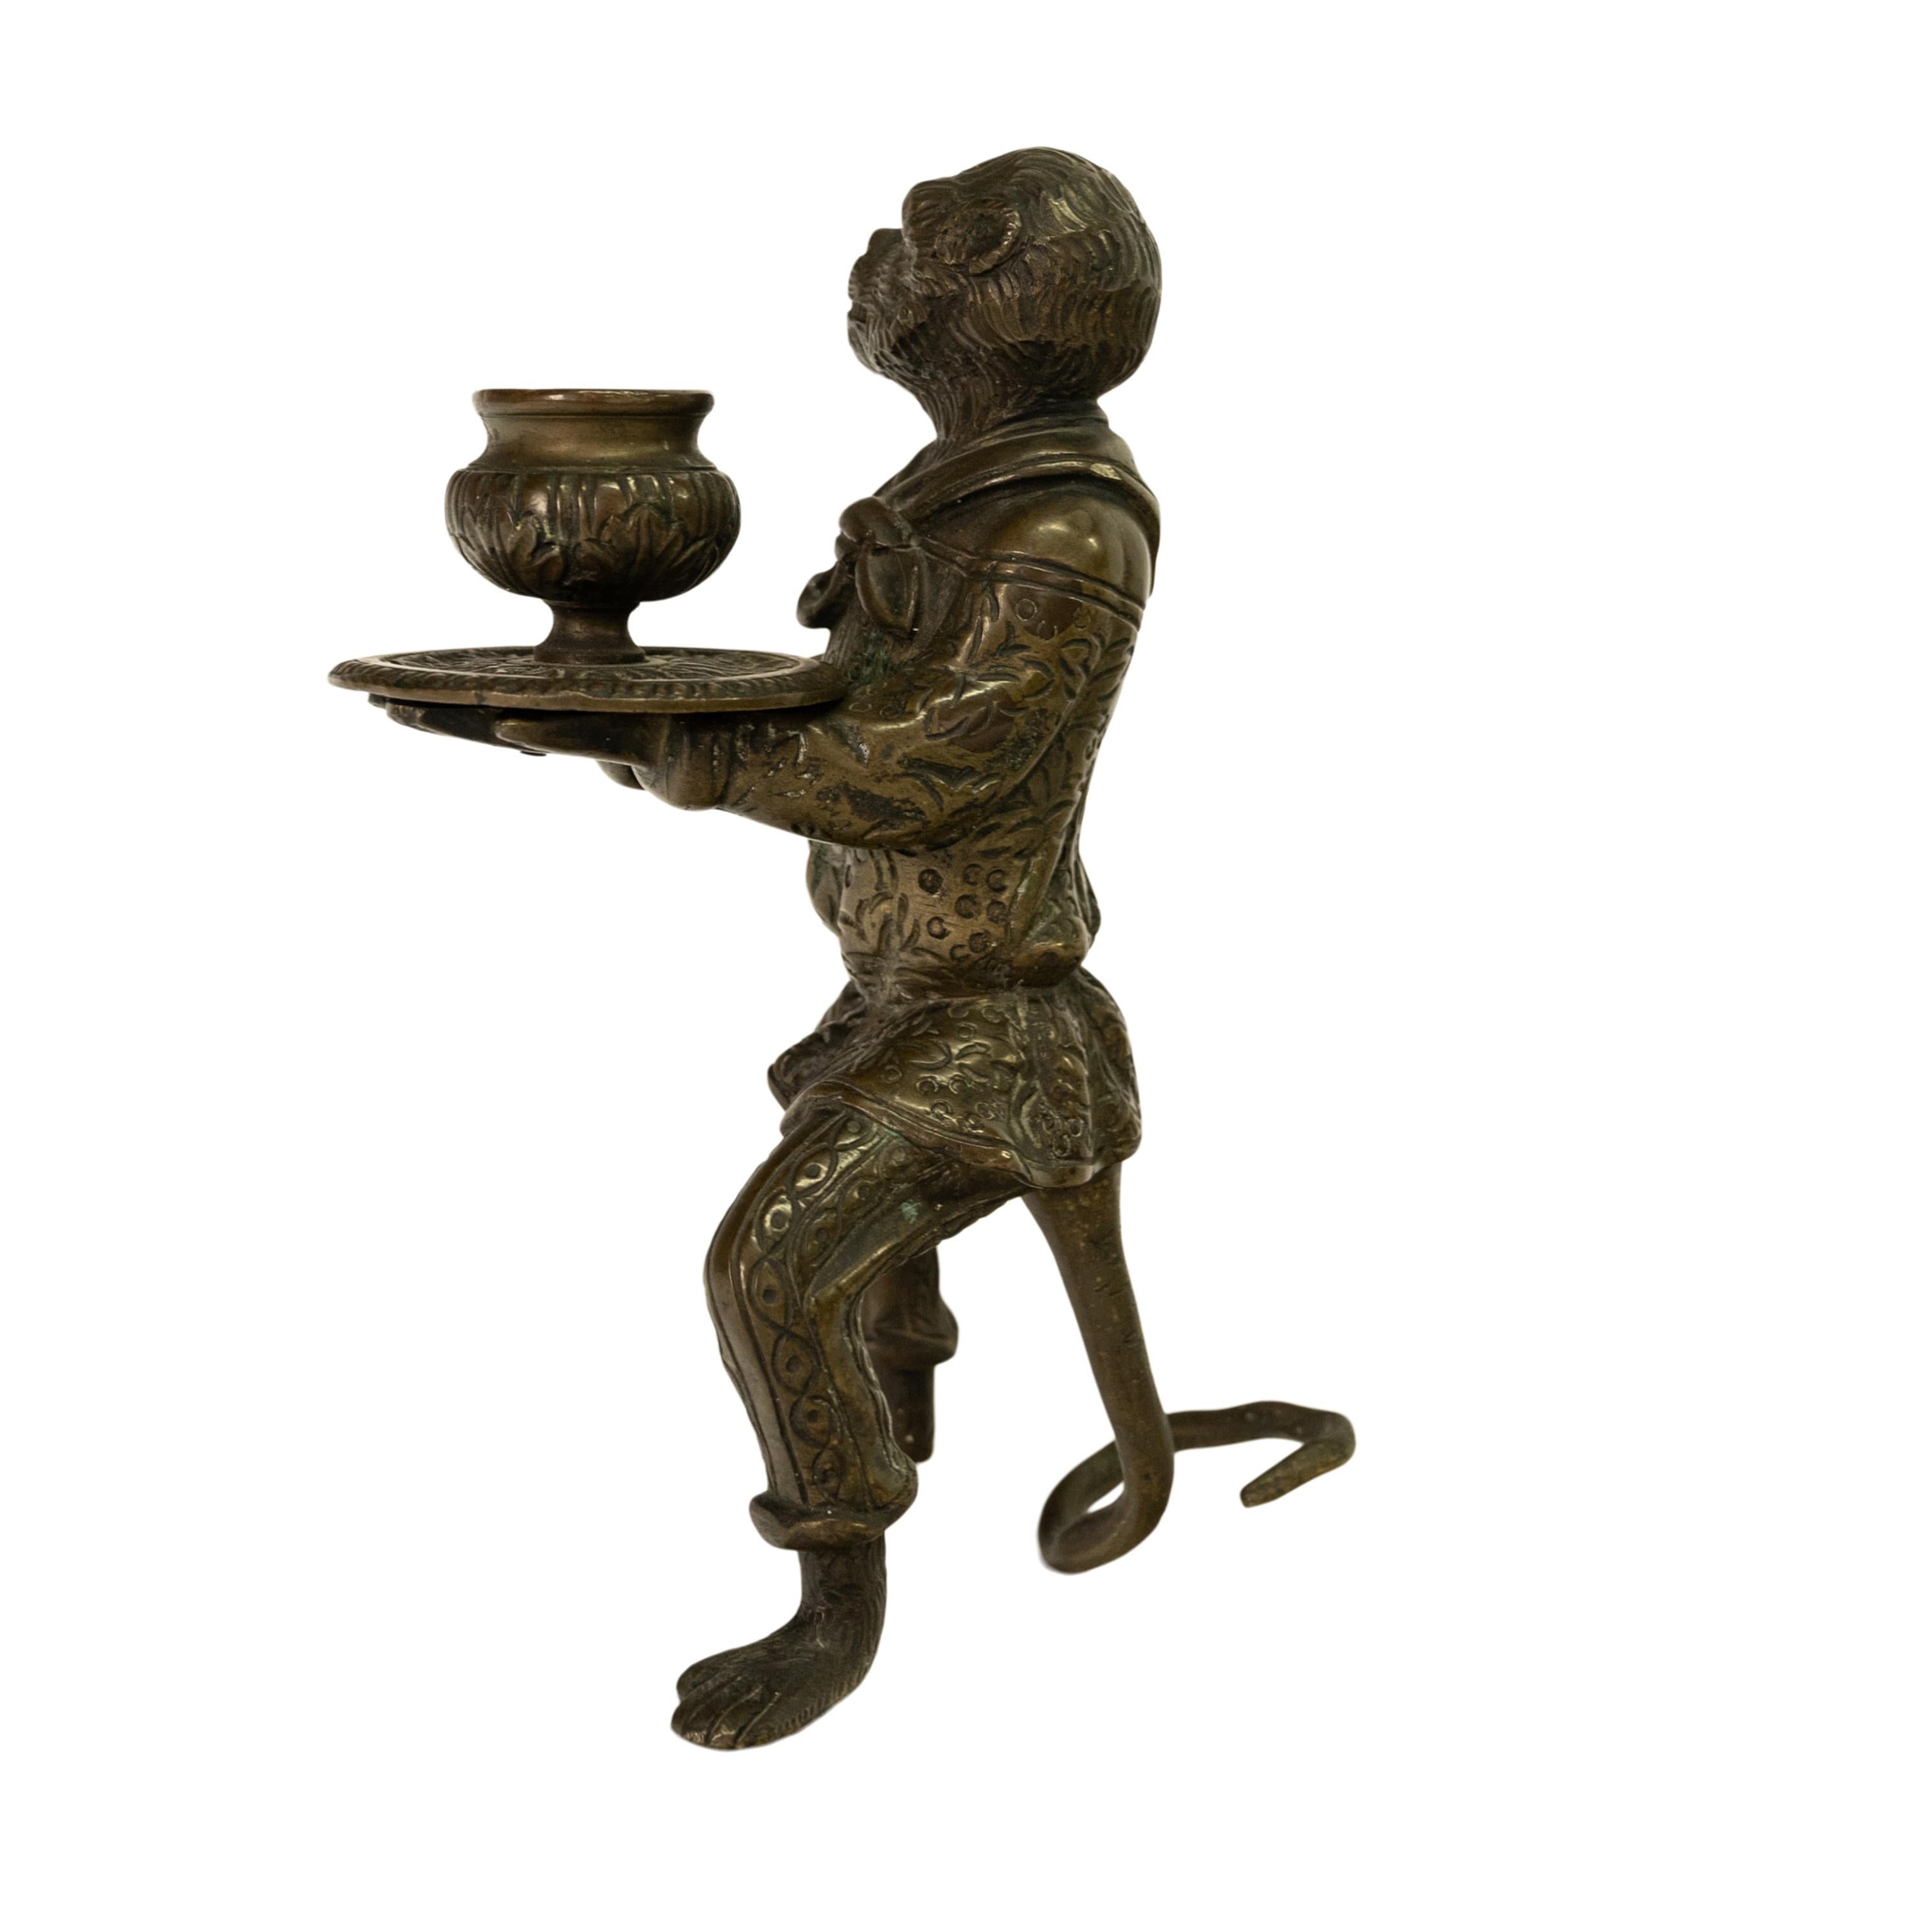 Pair Antique French Bronze Figural Monkey Statue Candleholders Candlesticks 1900 For Sale 5